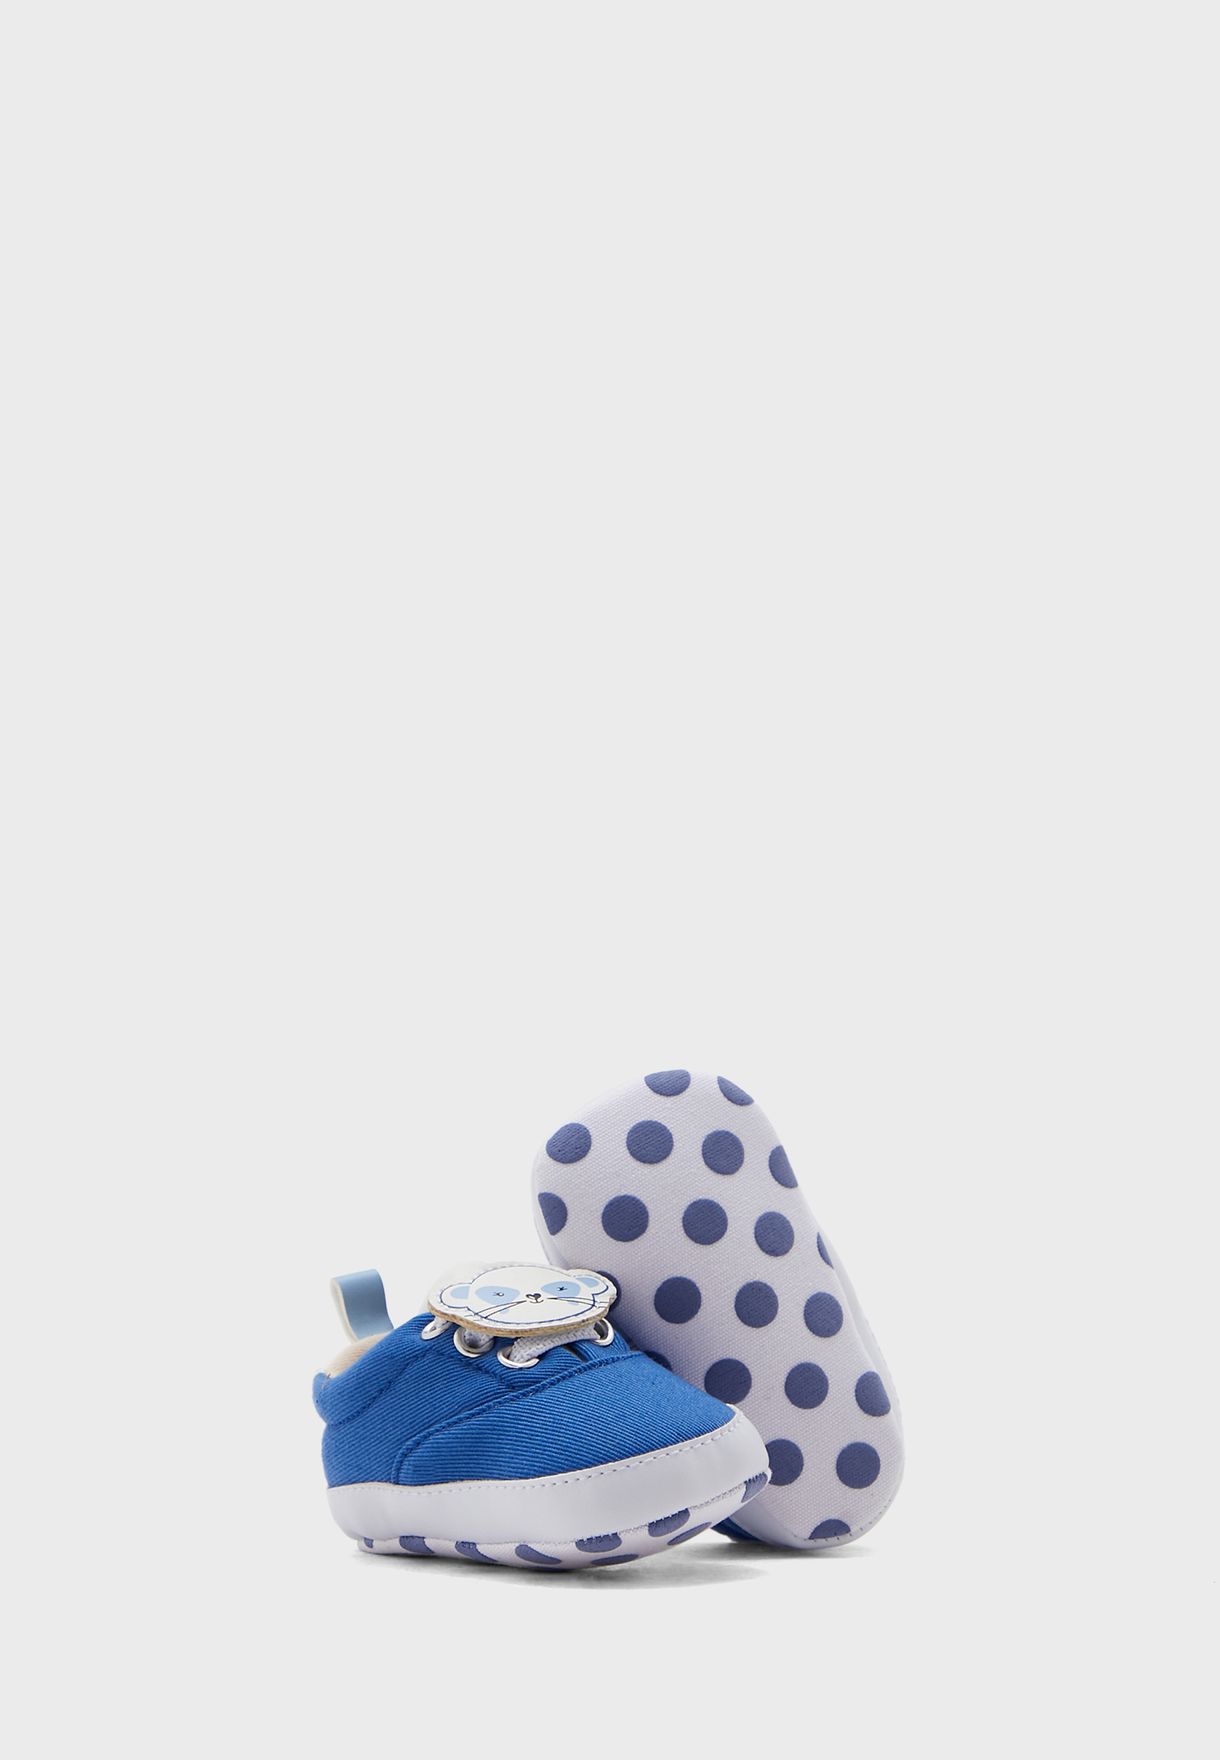 Infant Casual Slip Ons